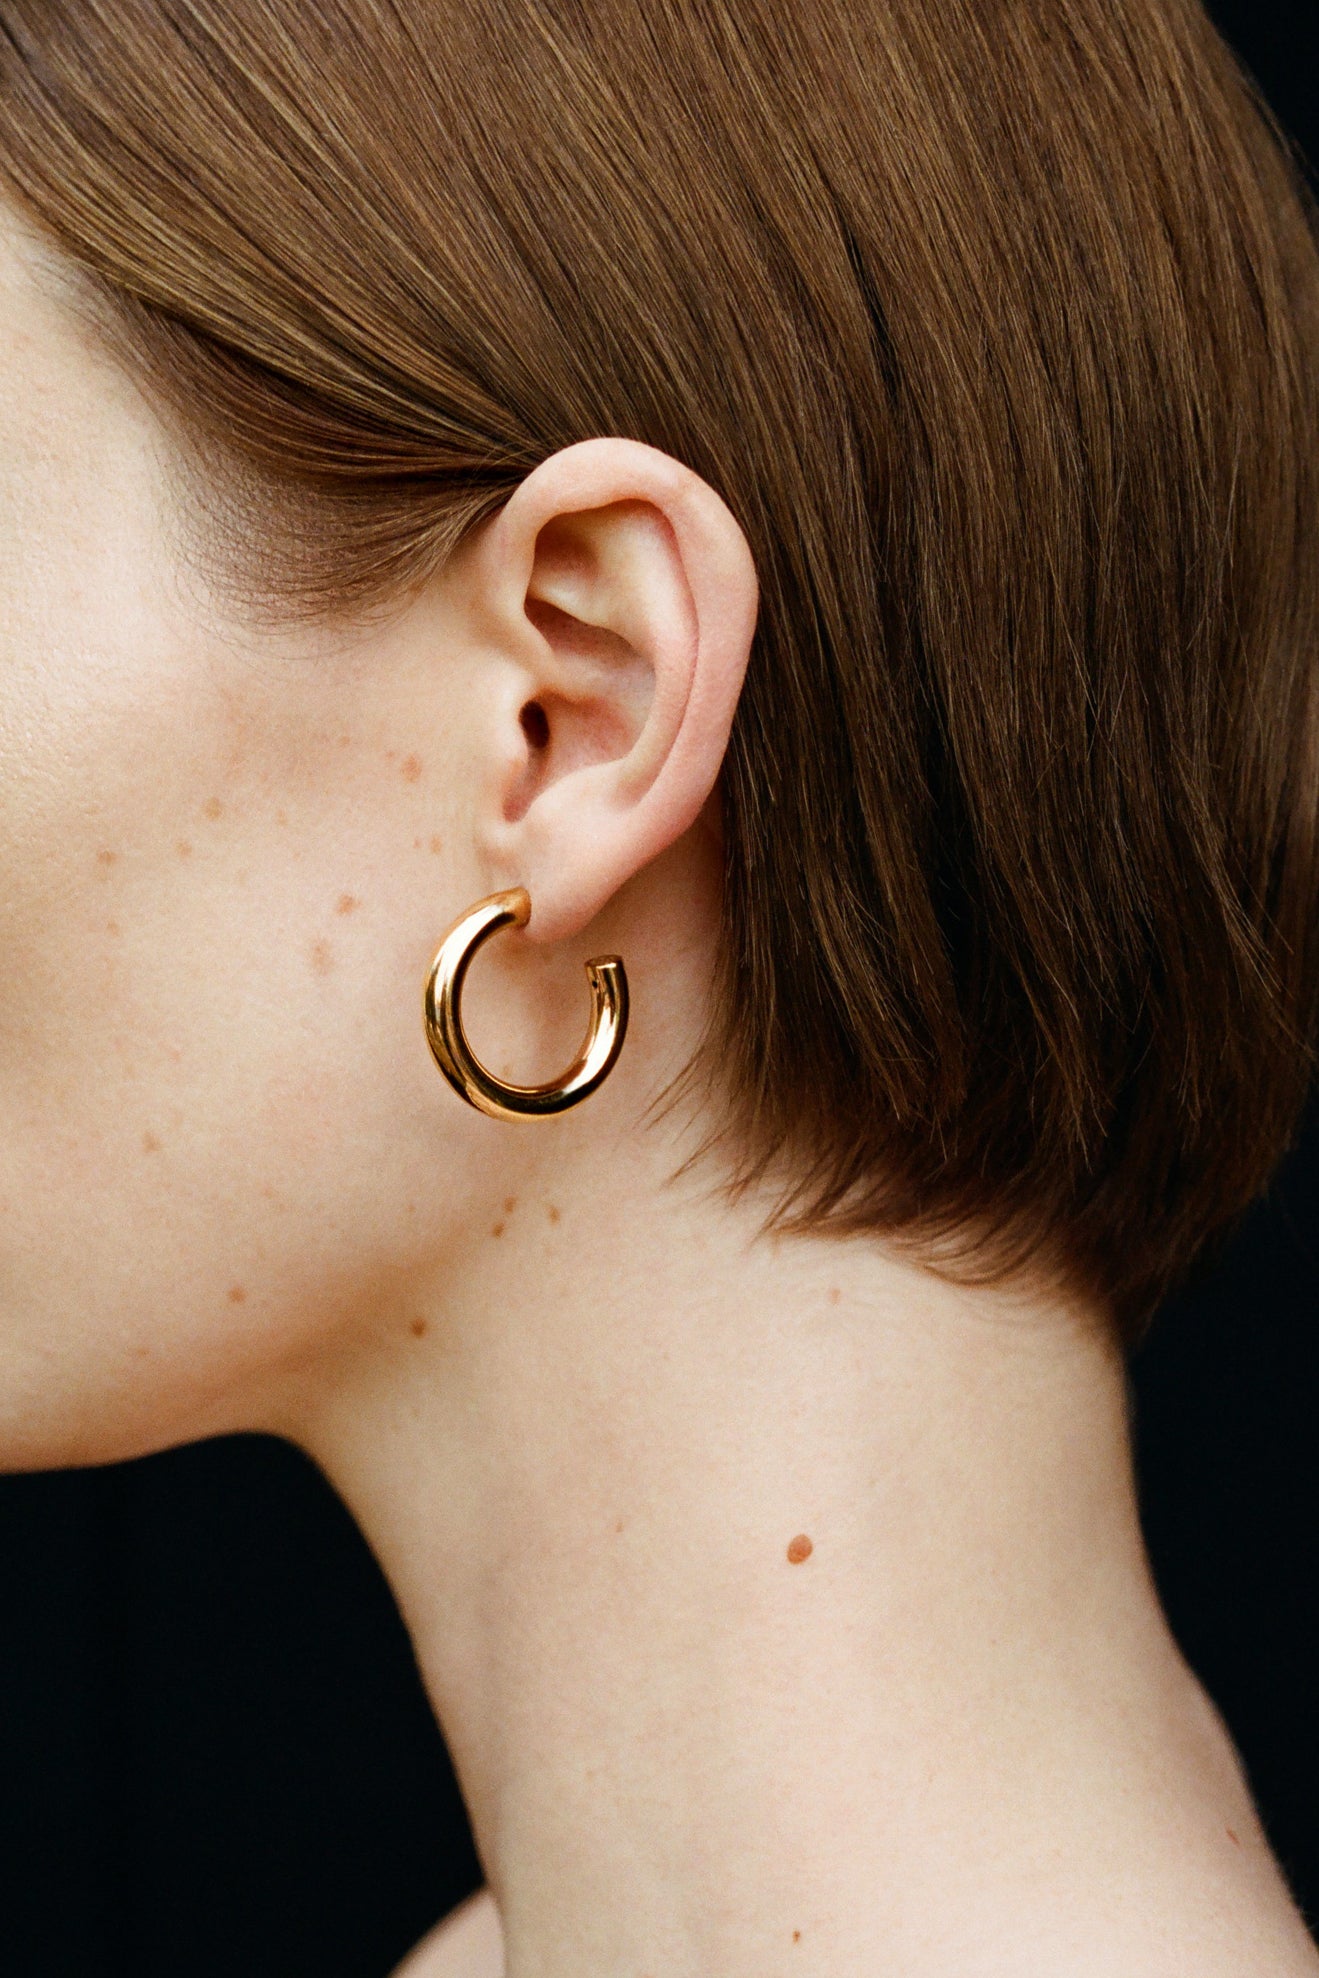 Top more than 258 small gold hoop earrings